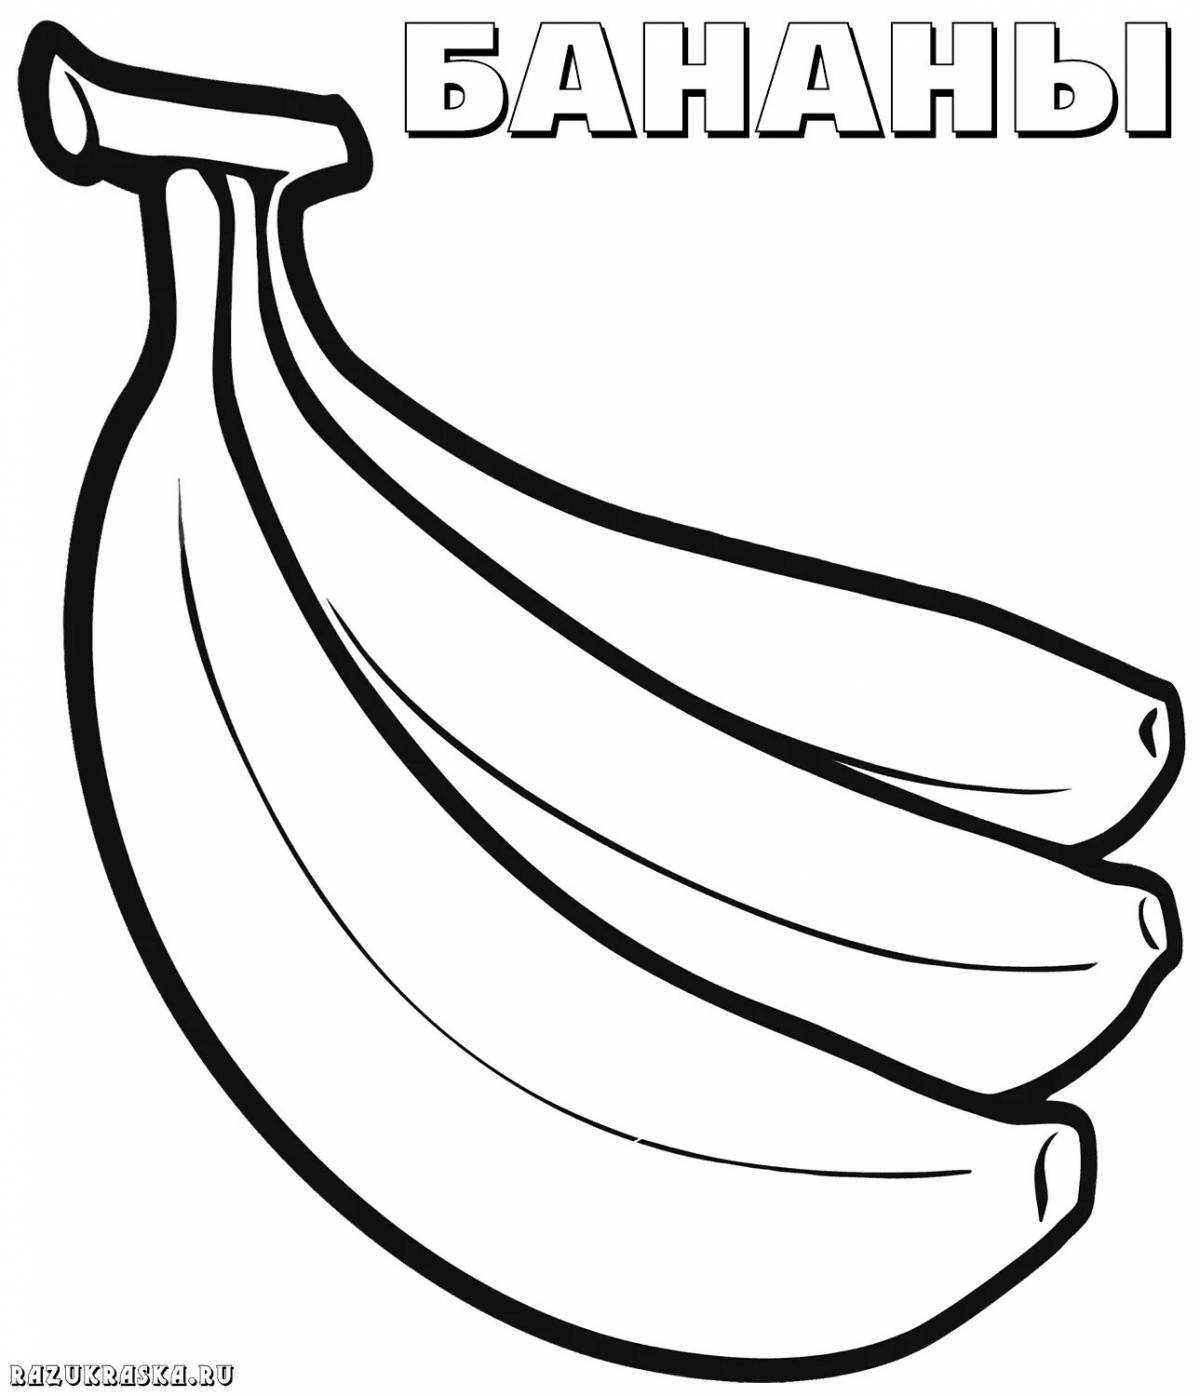 A fun banana coloring book for 5-6 year olds